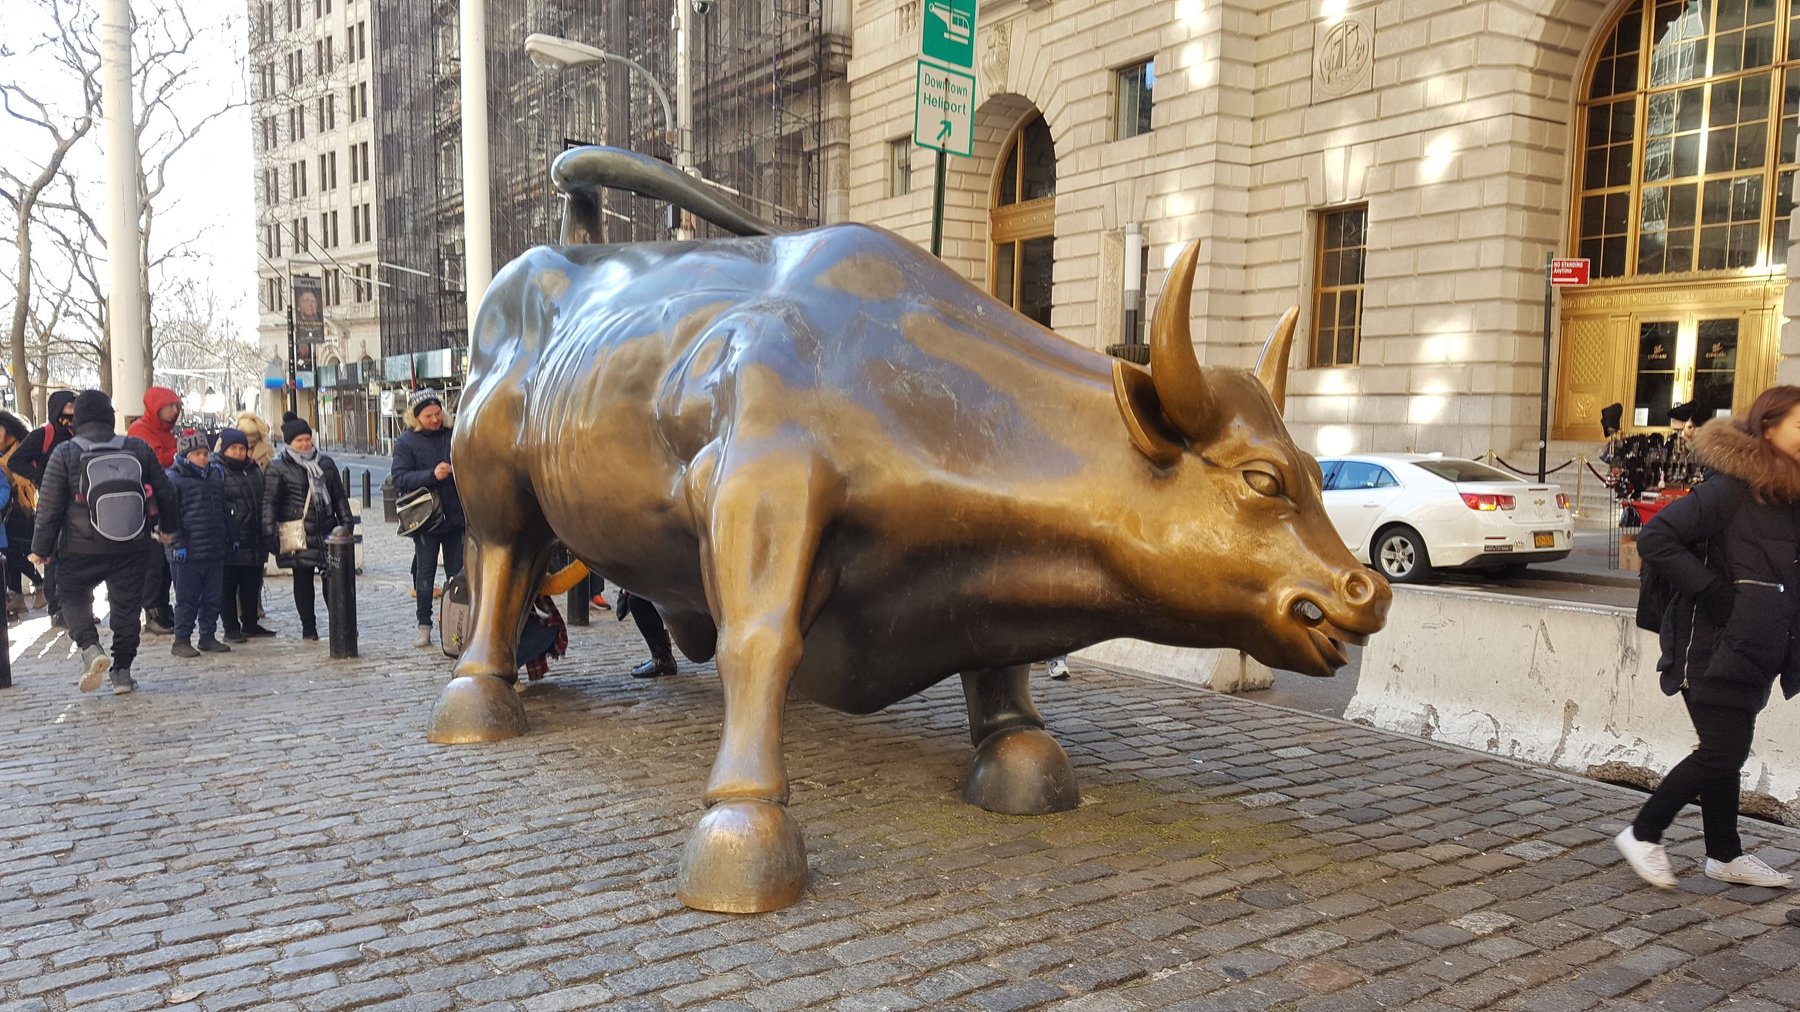 The bronze Charging Bull statue on Wall Street.